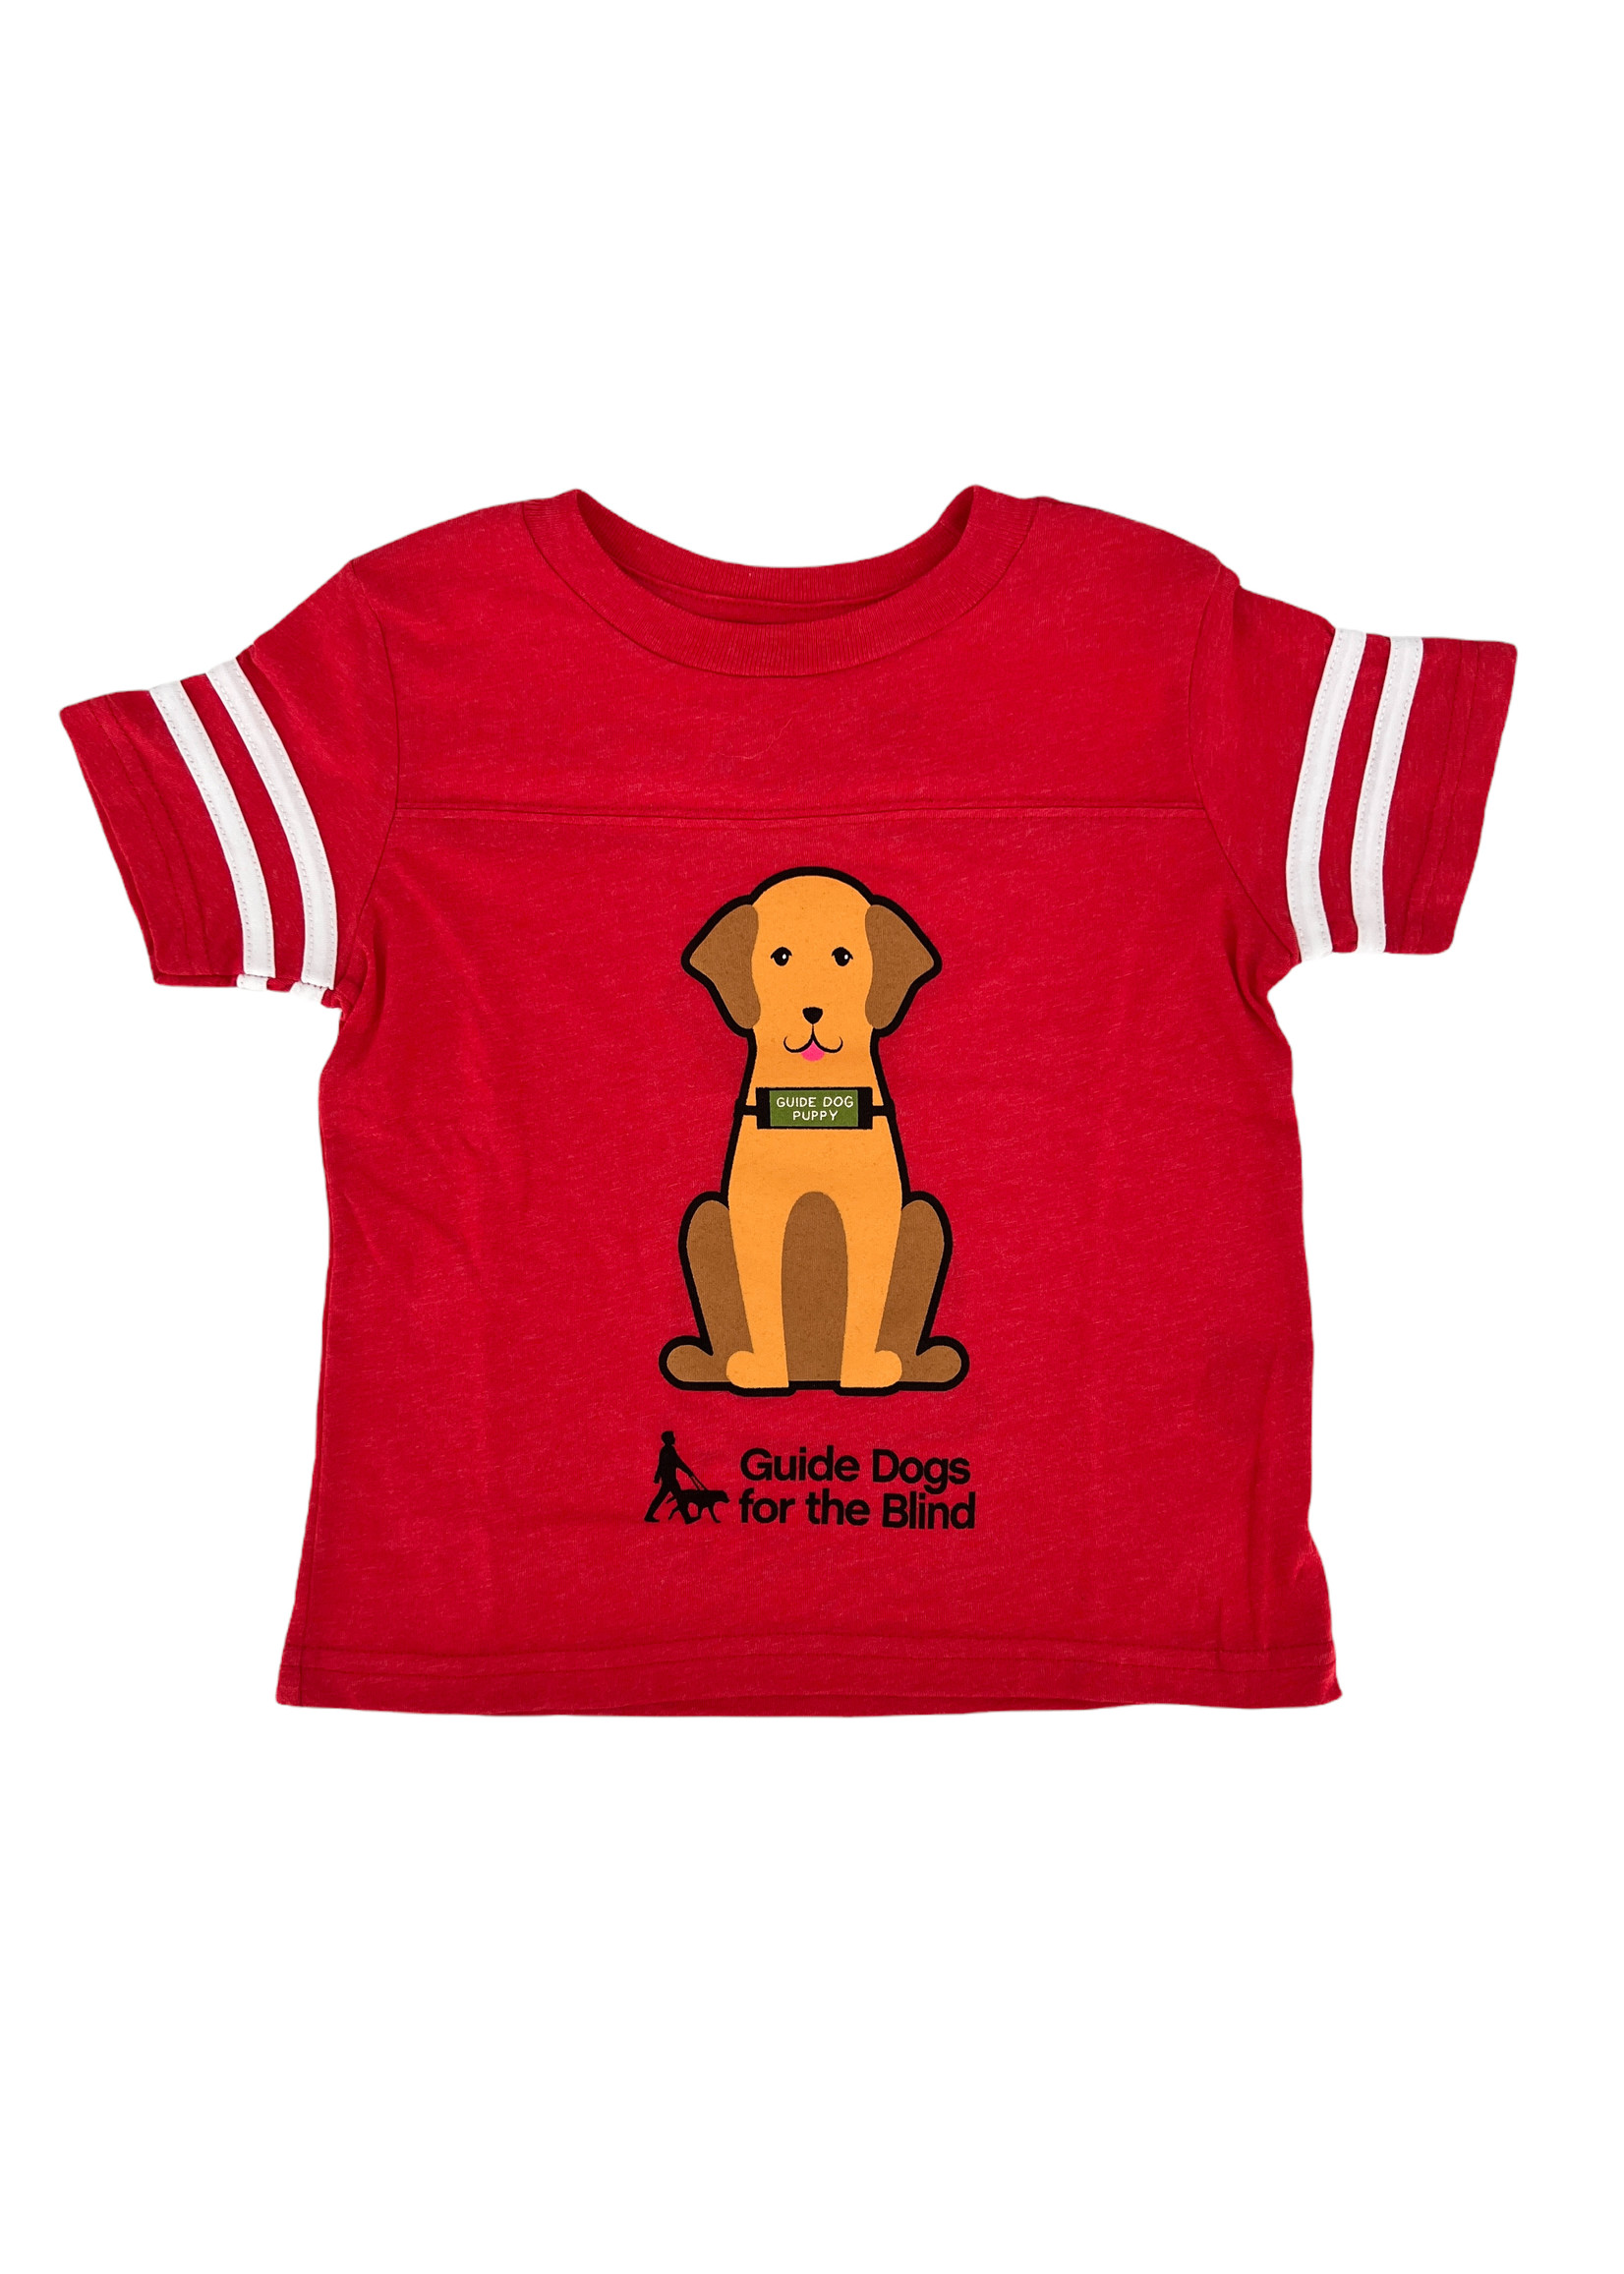 Toddler Tee - Yellow Lab in Puppy Jacket